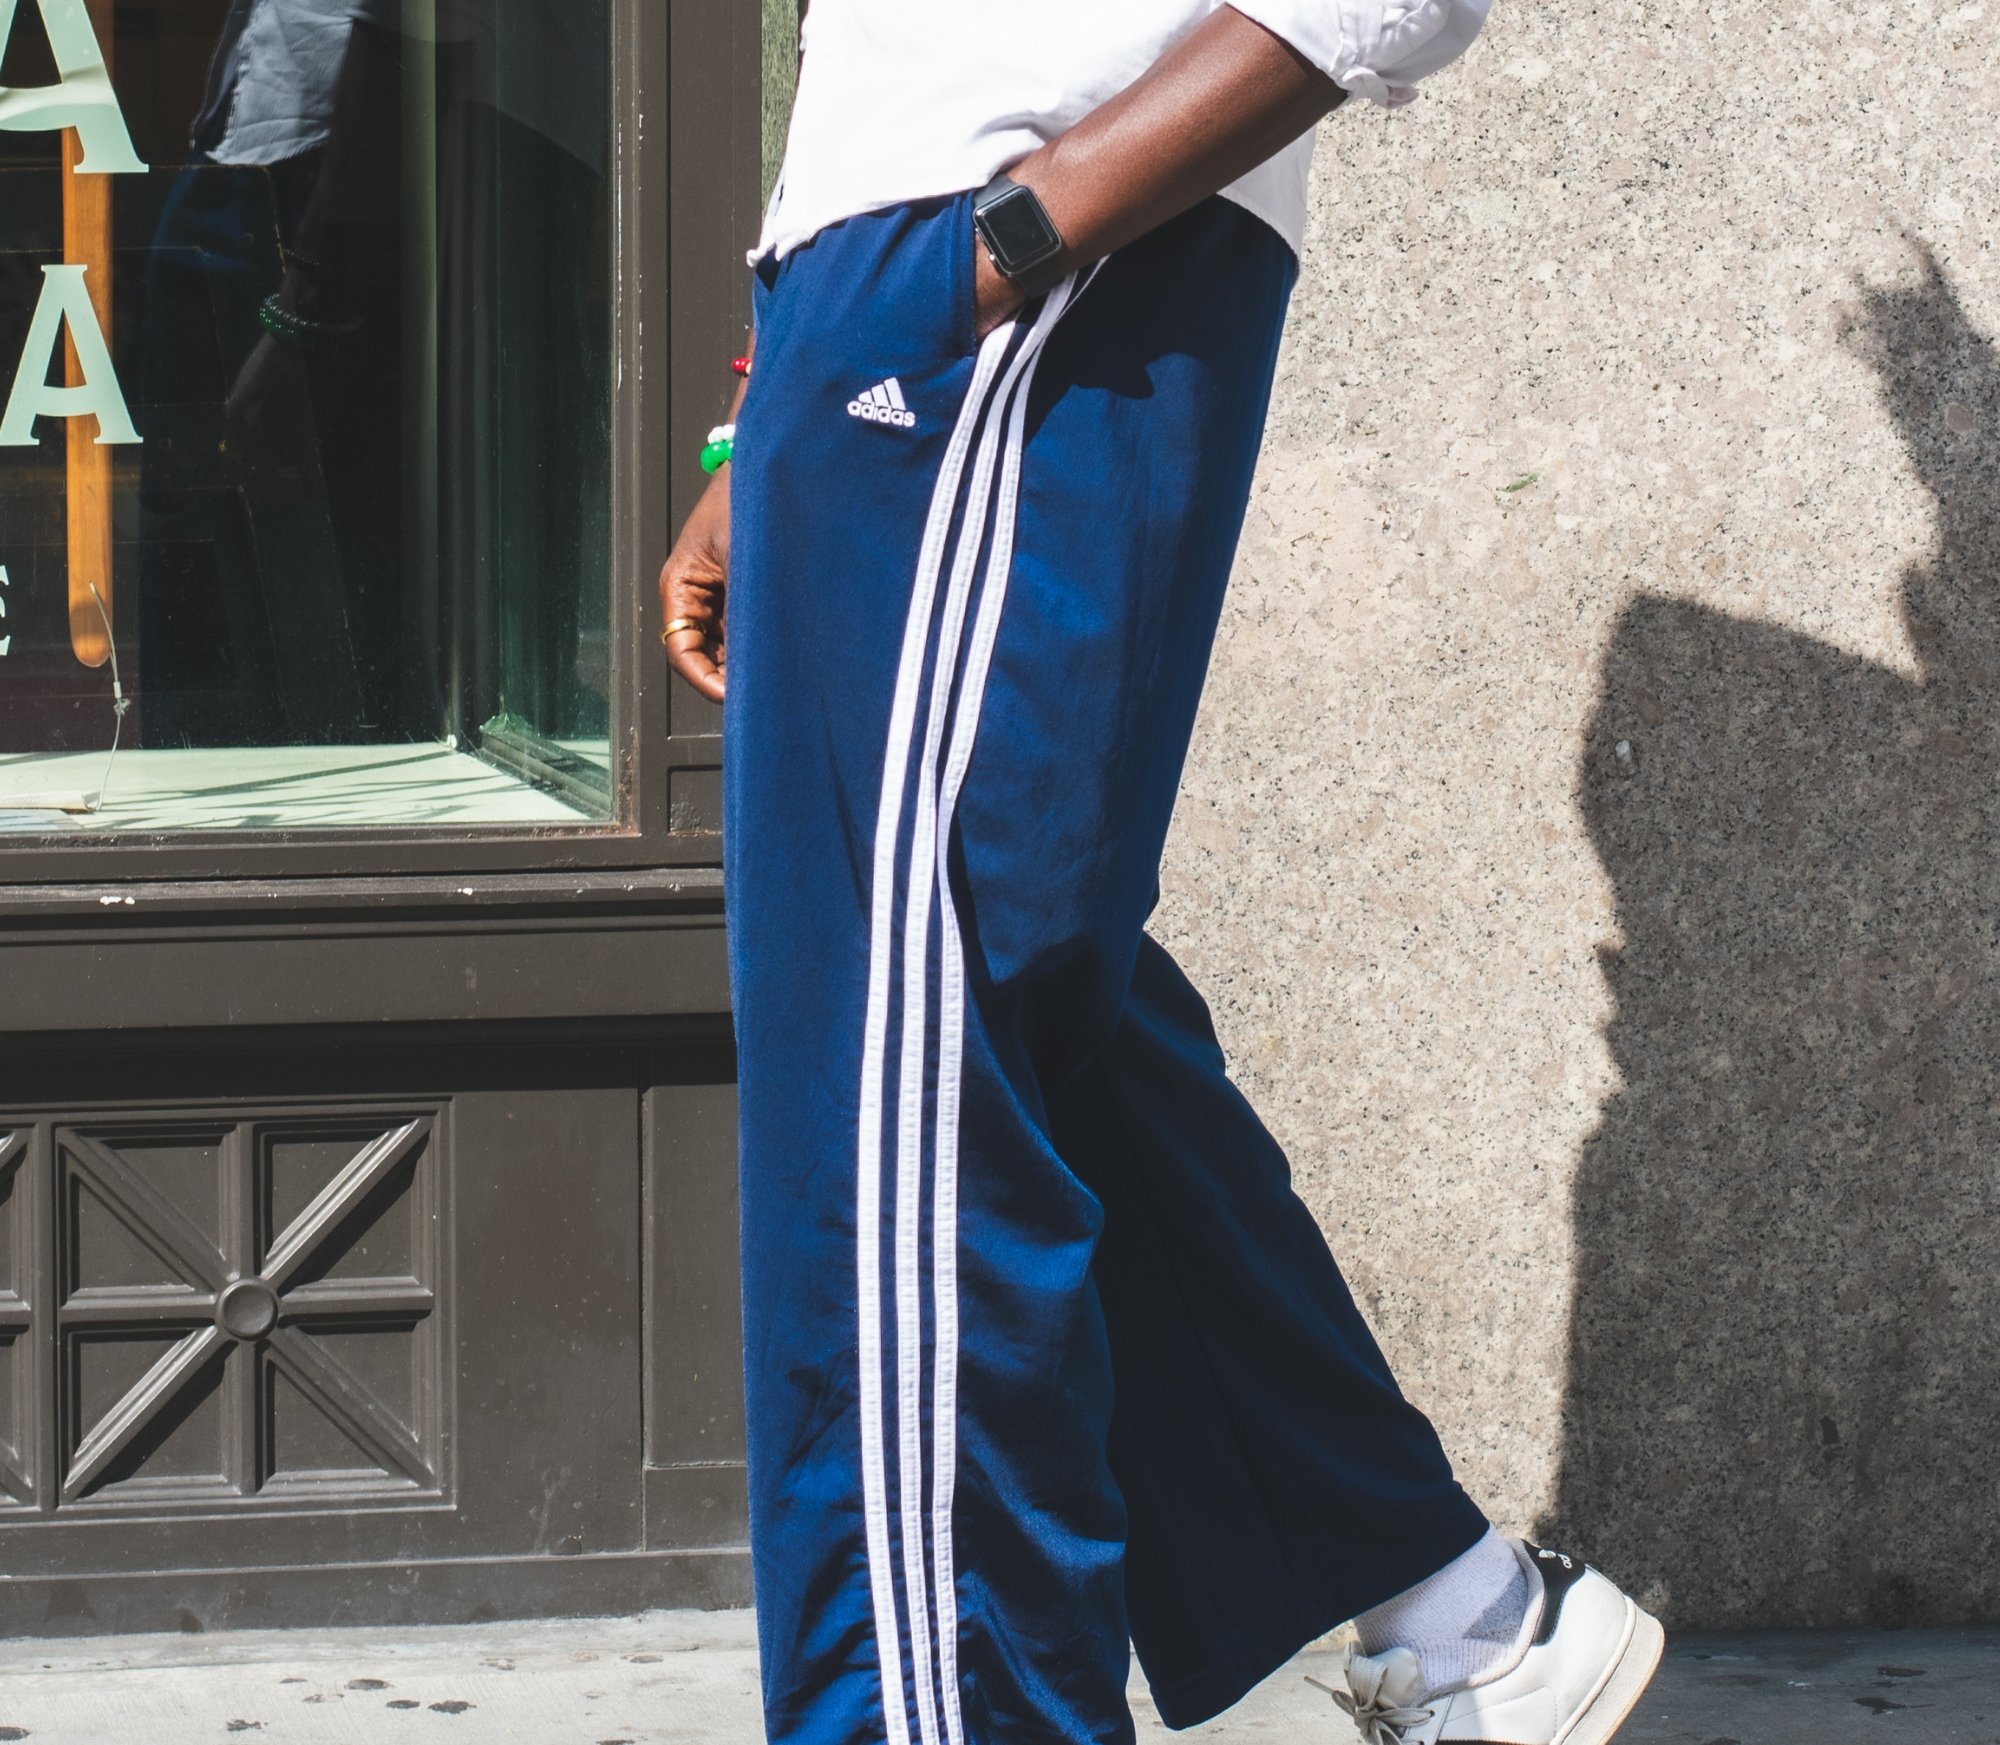 7 Ways To ROCK Adidas Joggers | Men's Outfit Ideas - YouTube